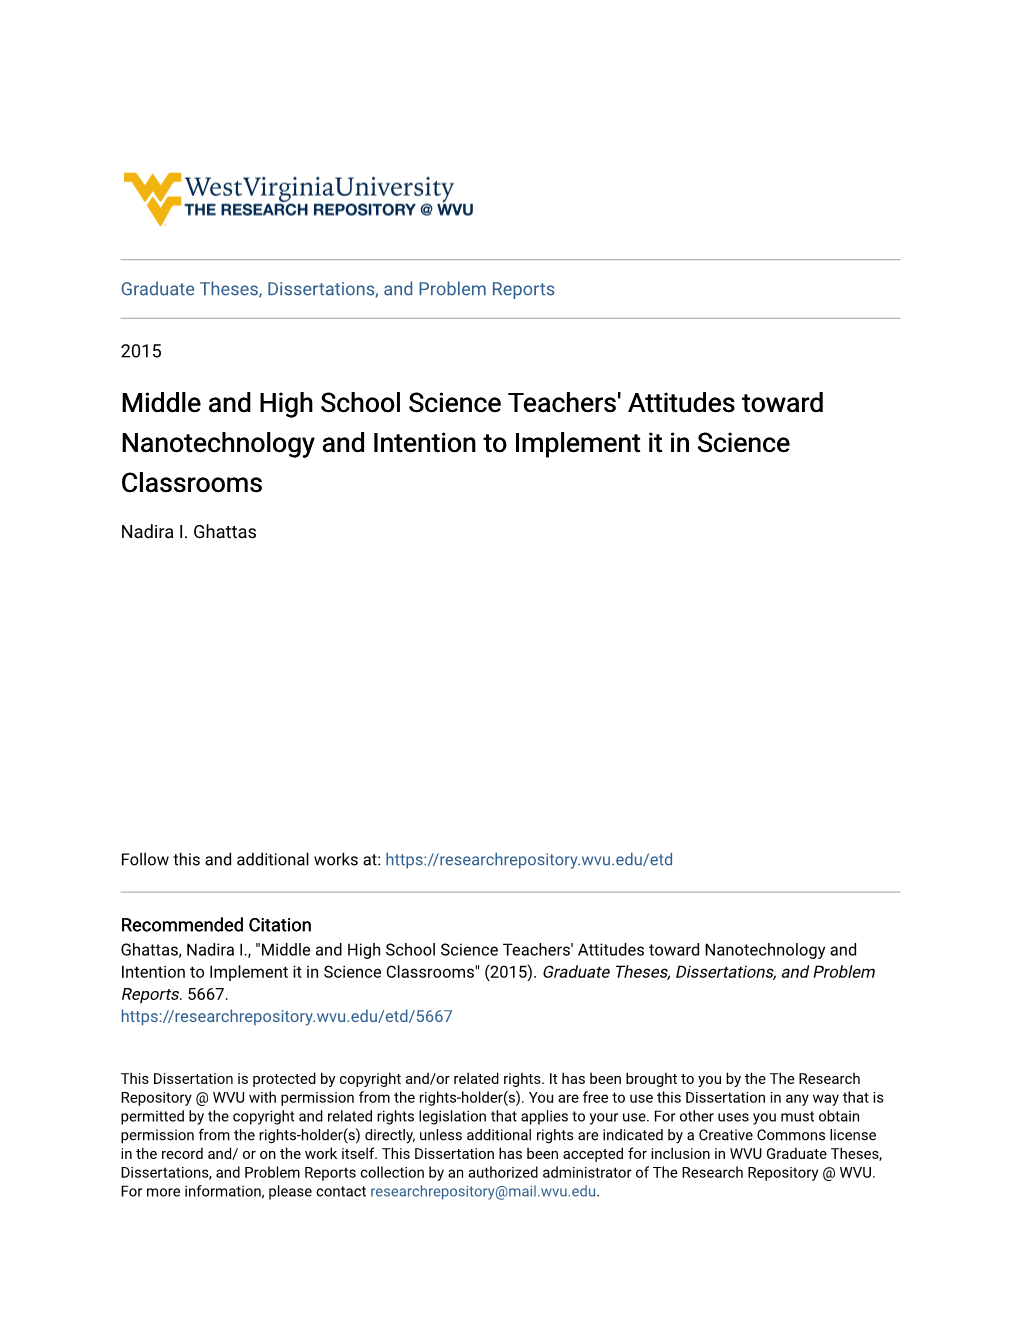 Middle and High School Science Teachers' Attitudes Toward Nanotechnology and Intention to Implement It in Science Classrooms